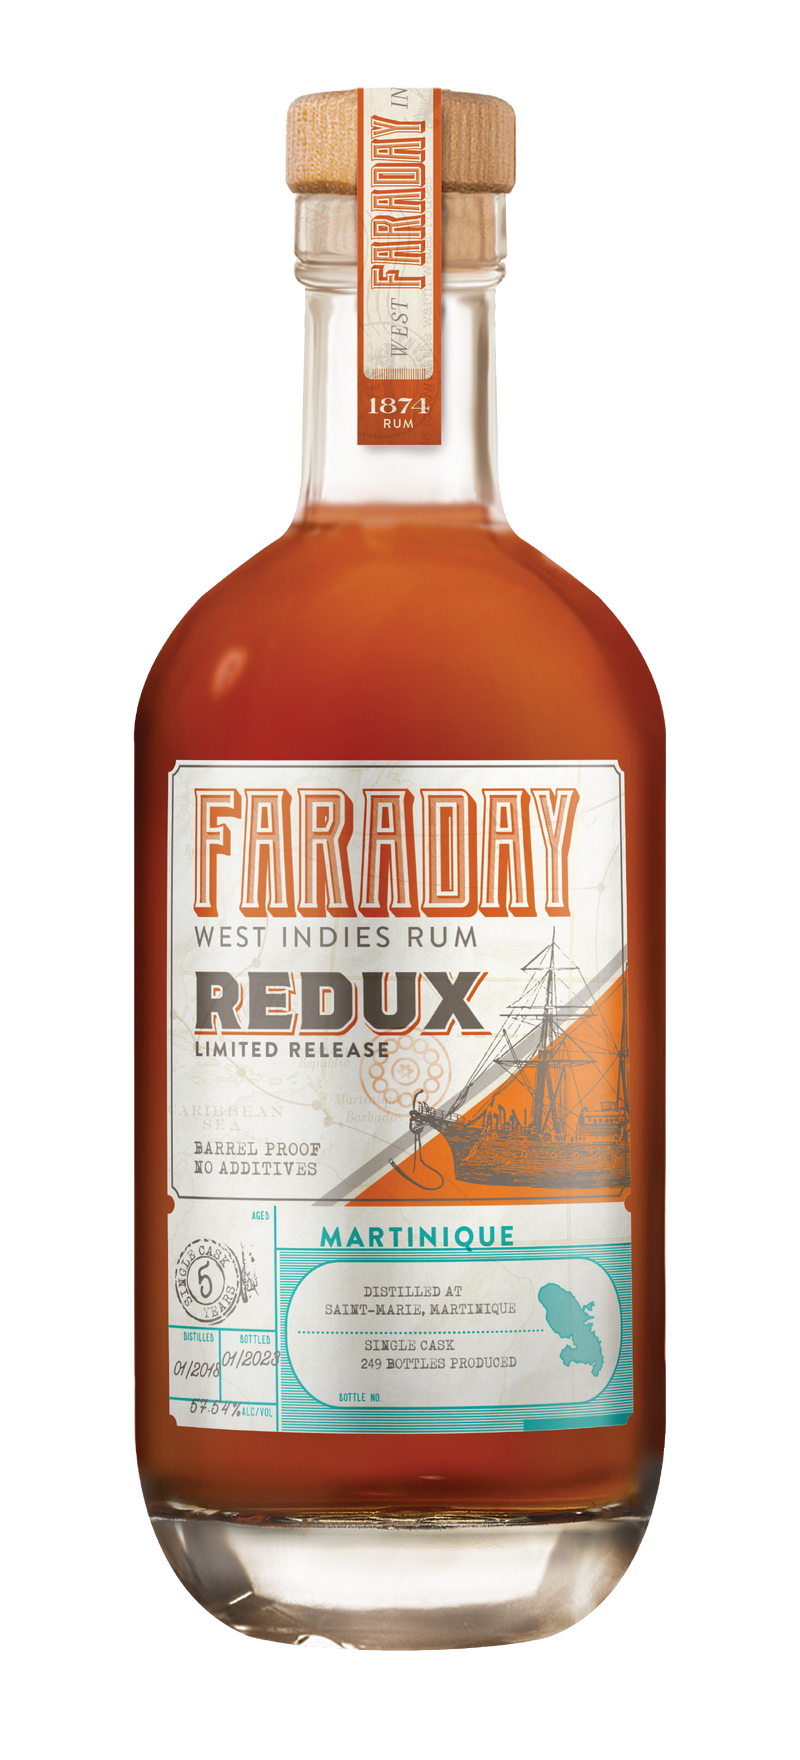 Faraday West Indies Redux Limited Release - Martinique Single Cask 5 Years Aged